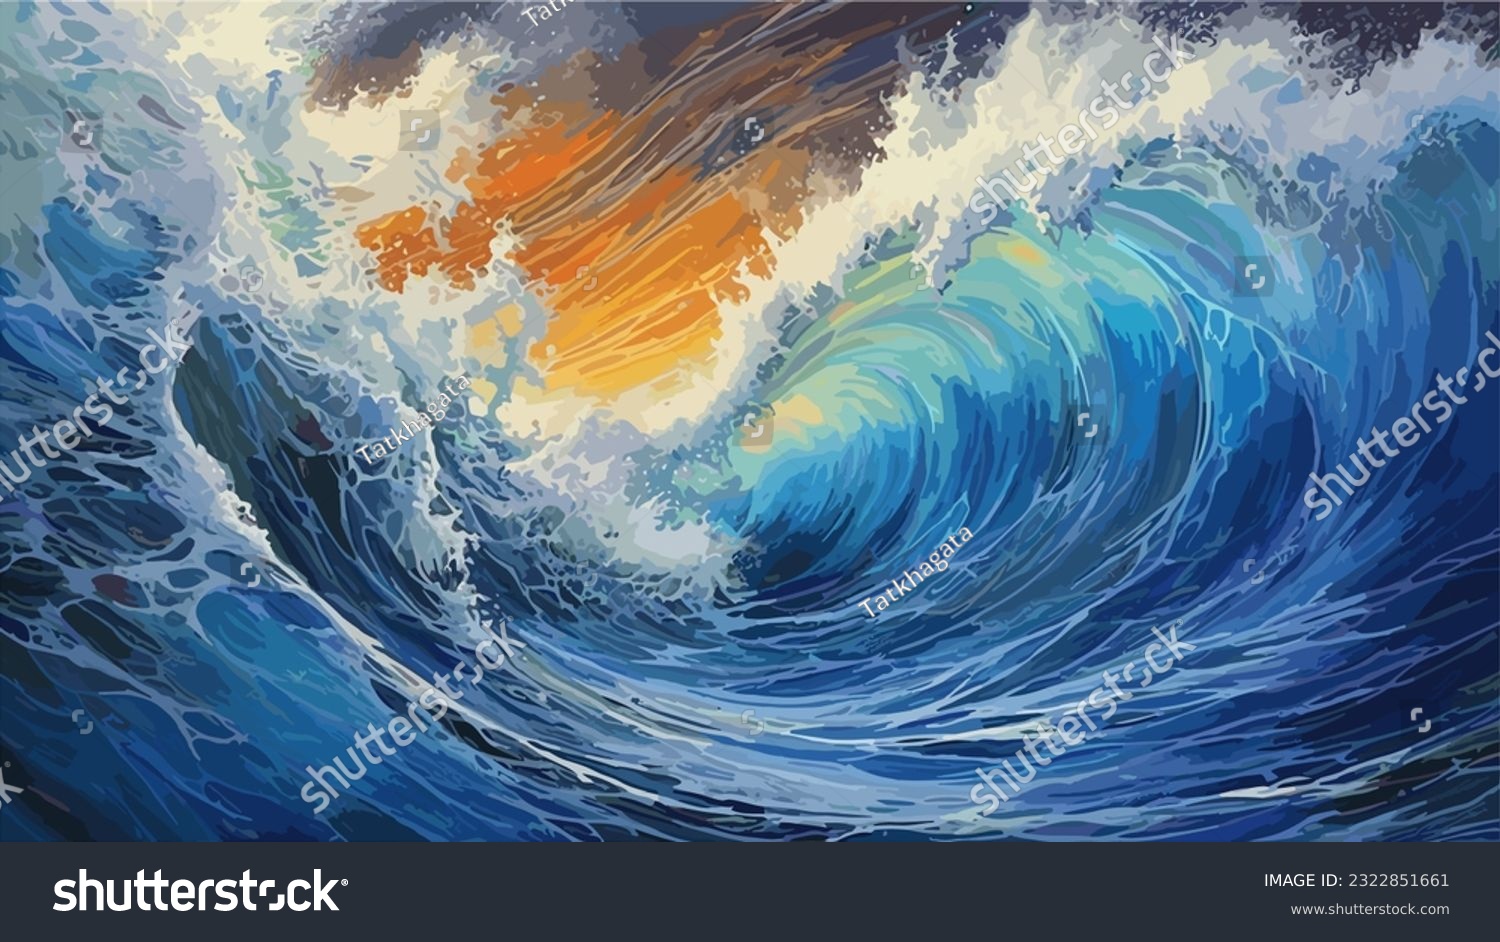 Big wave in a raging sea. A strong storm in the ocean. Big waves. Blue tones. The power of raging nature. Seascape, artwork. Vector illustration design #2322851661